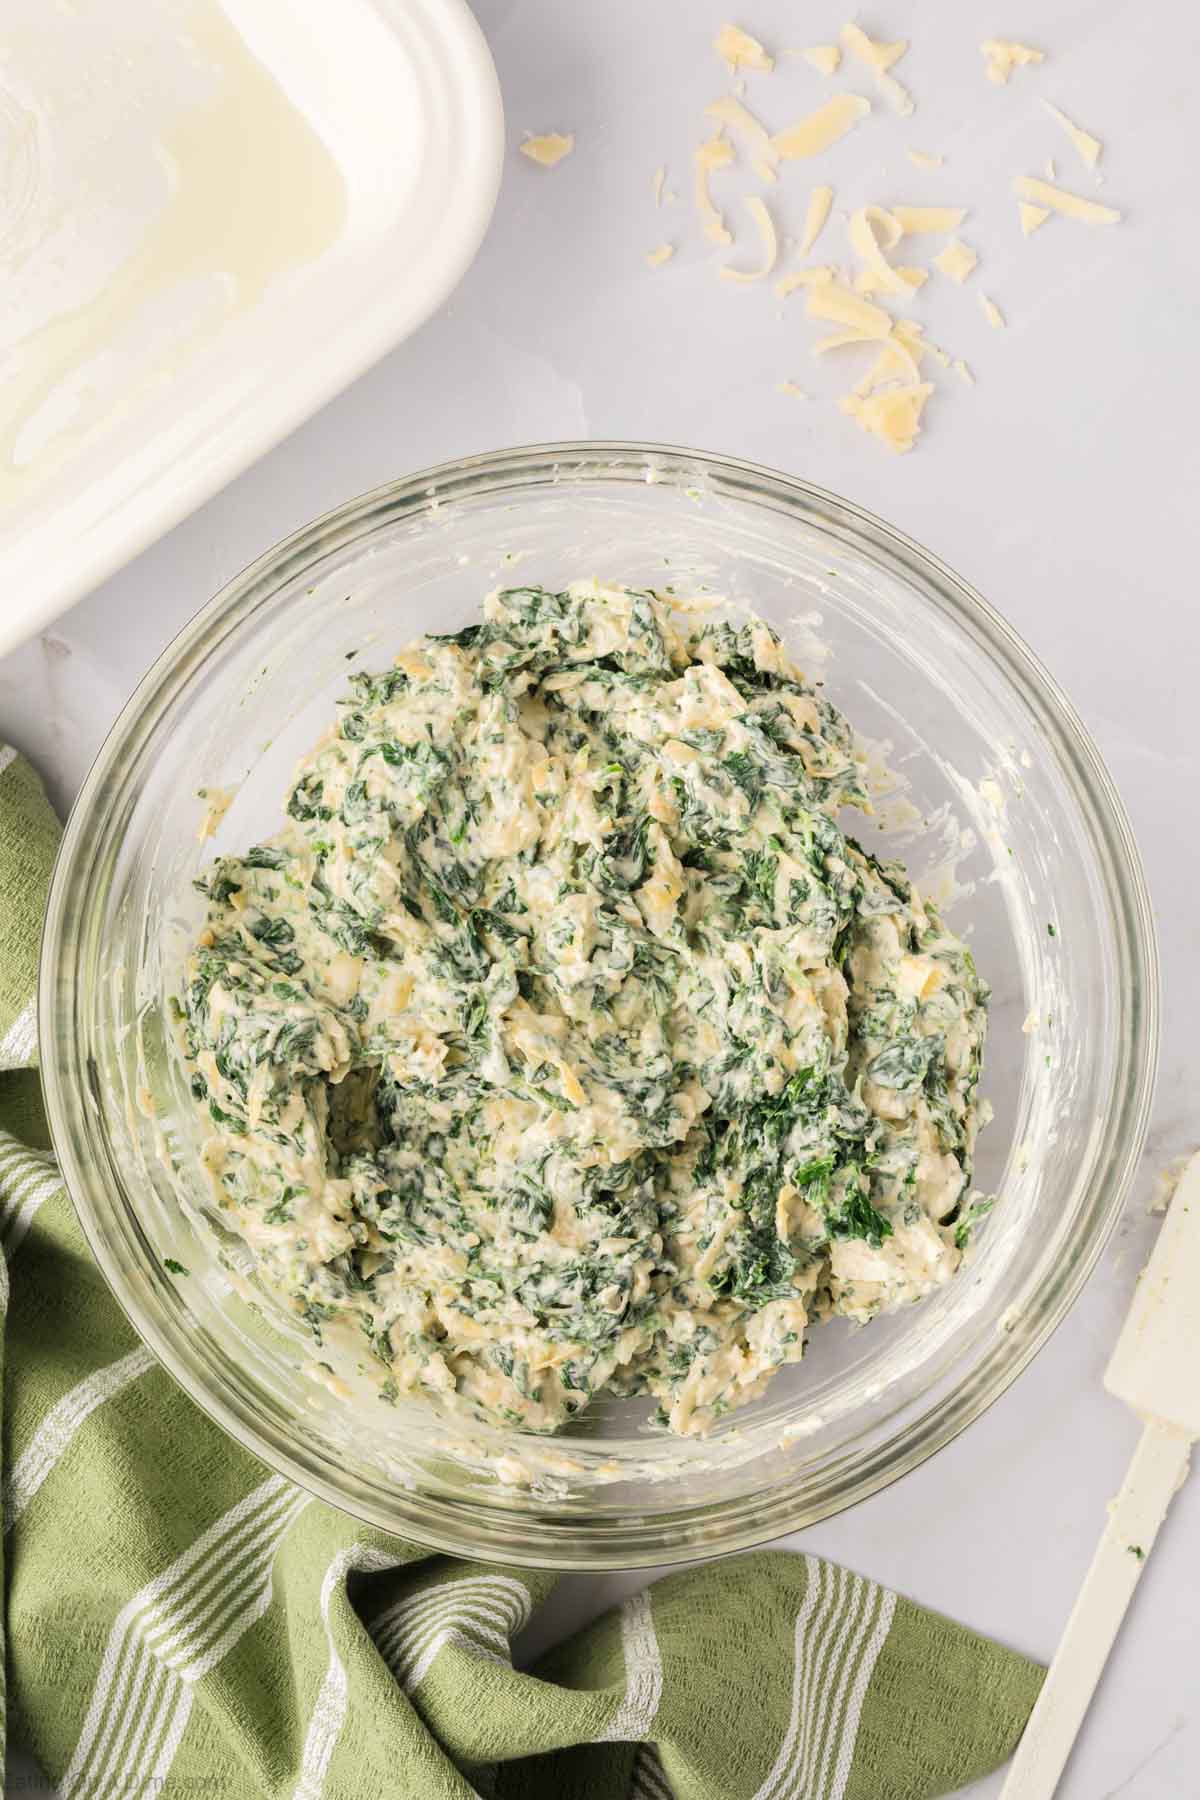 Stir in spinach, artichoke hearts, cheese and seasoning with the mayo mixture